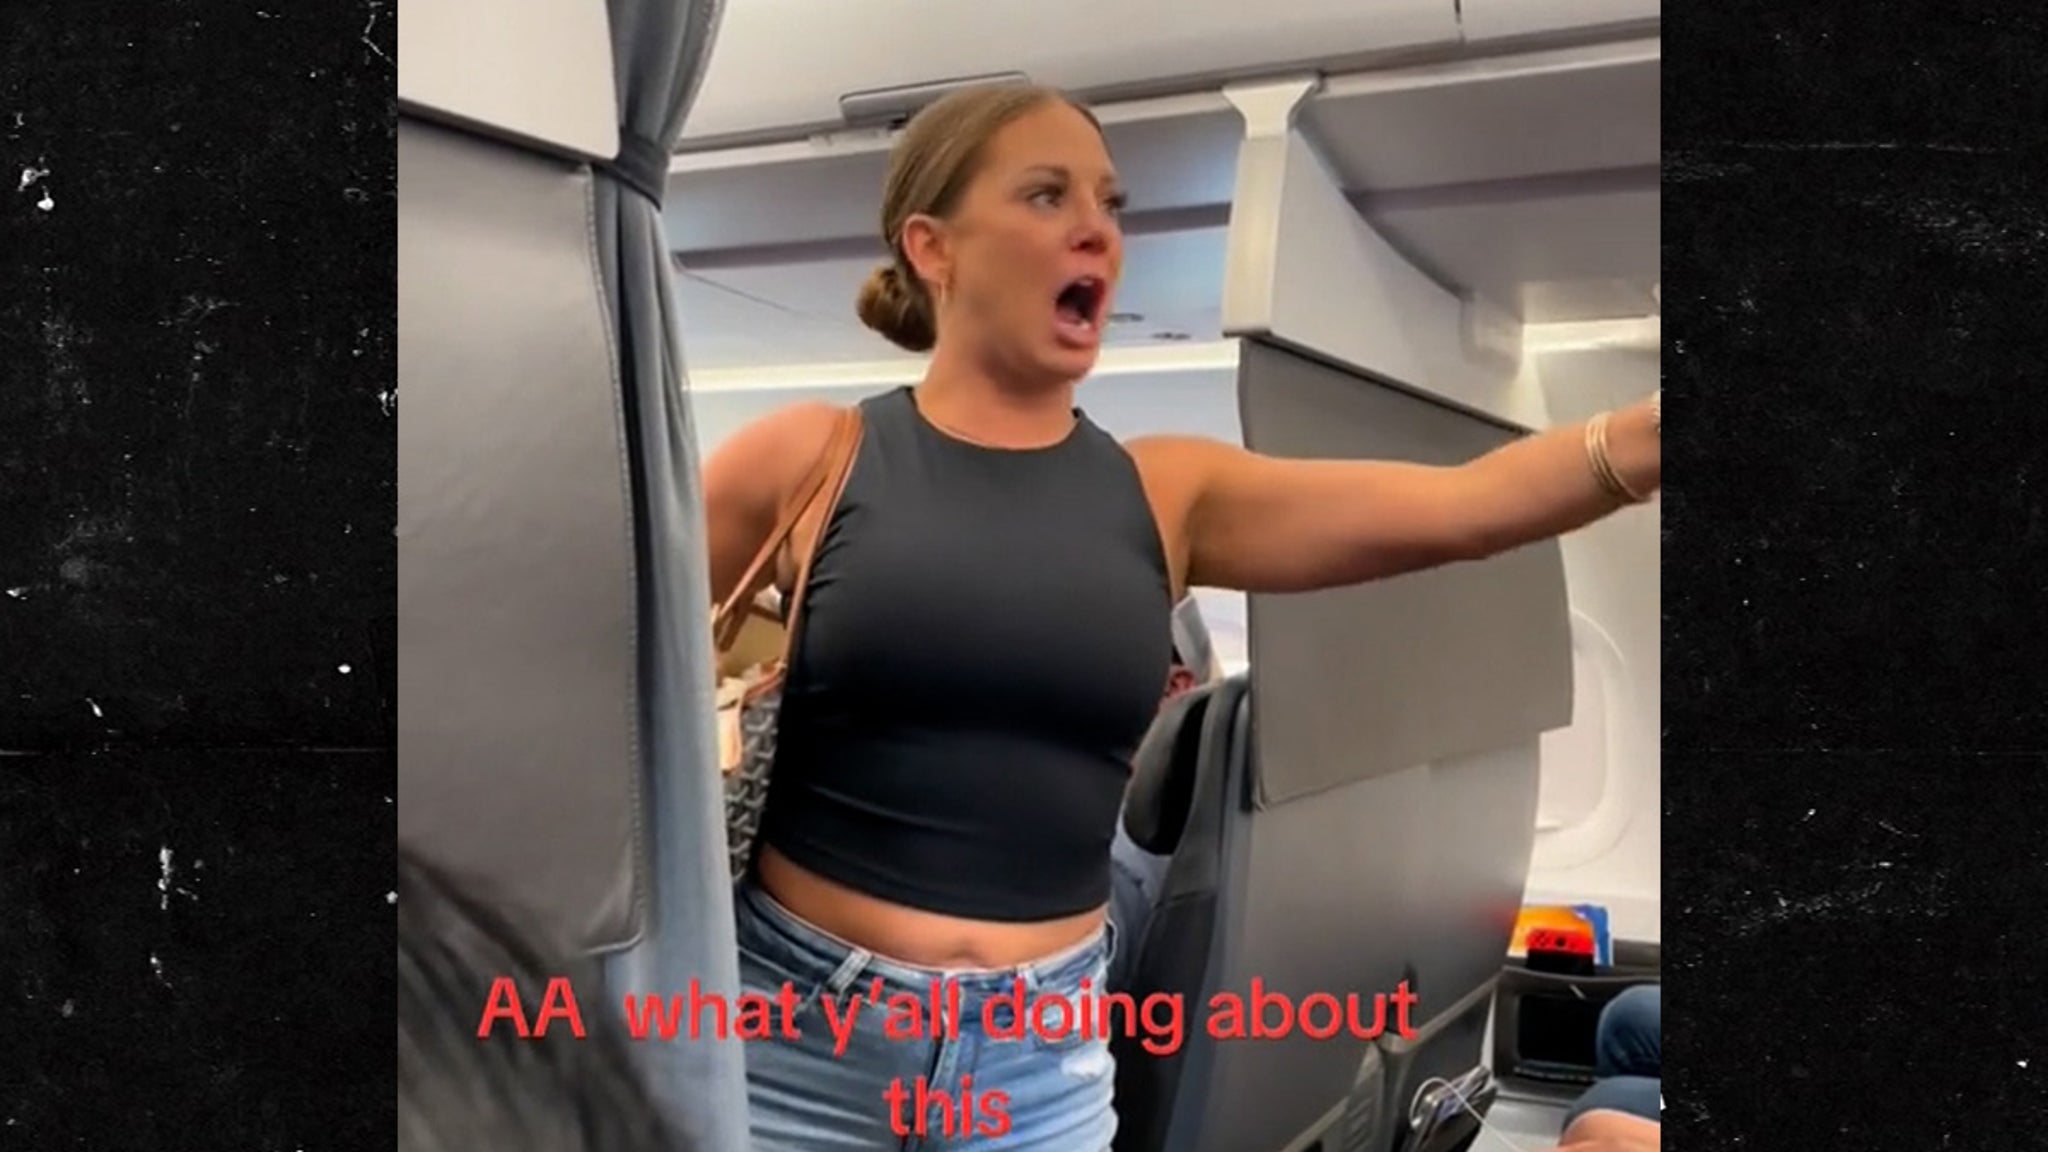 Woman freaks out on plane, claims to see something that isn’t actually there